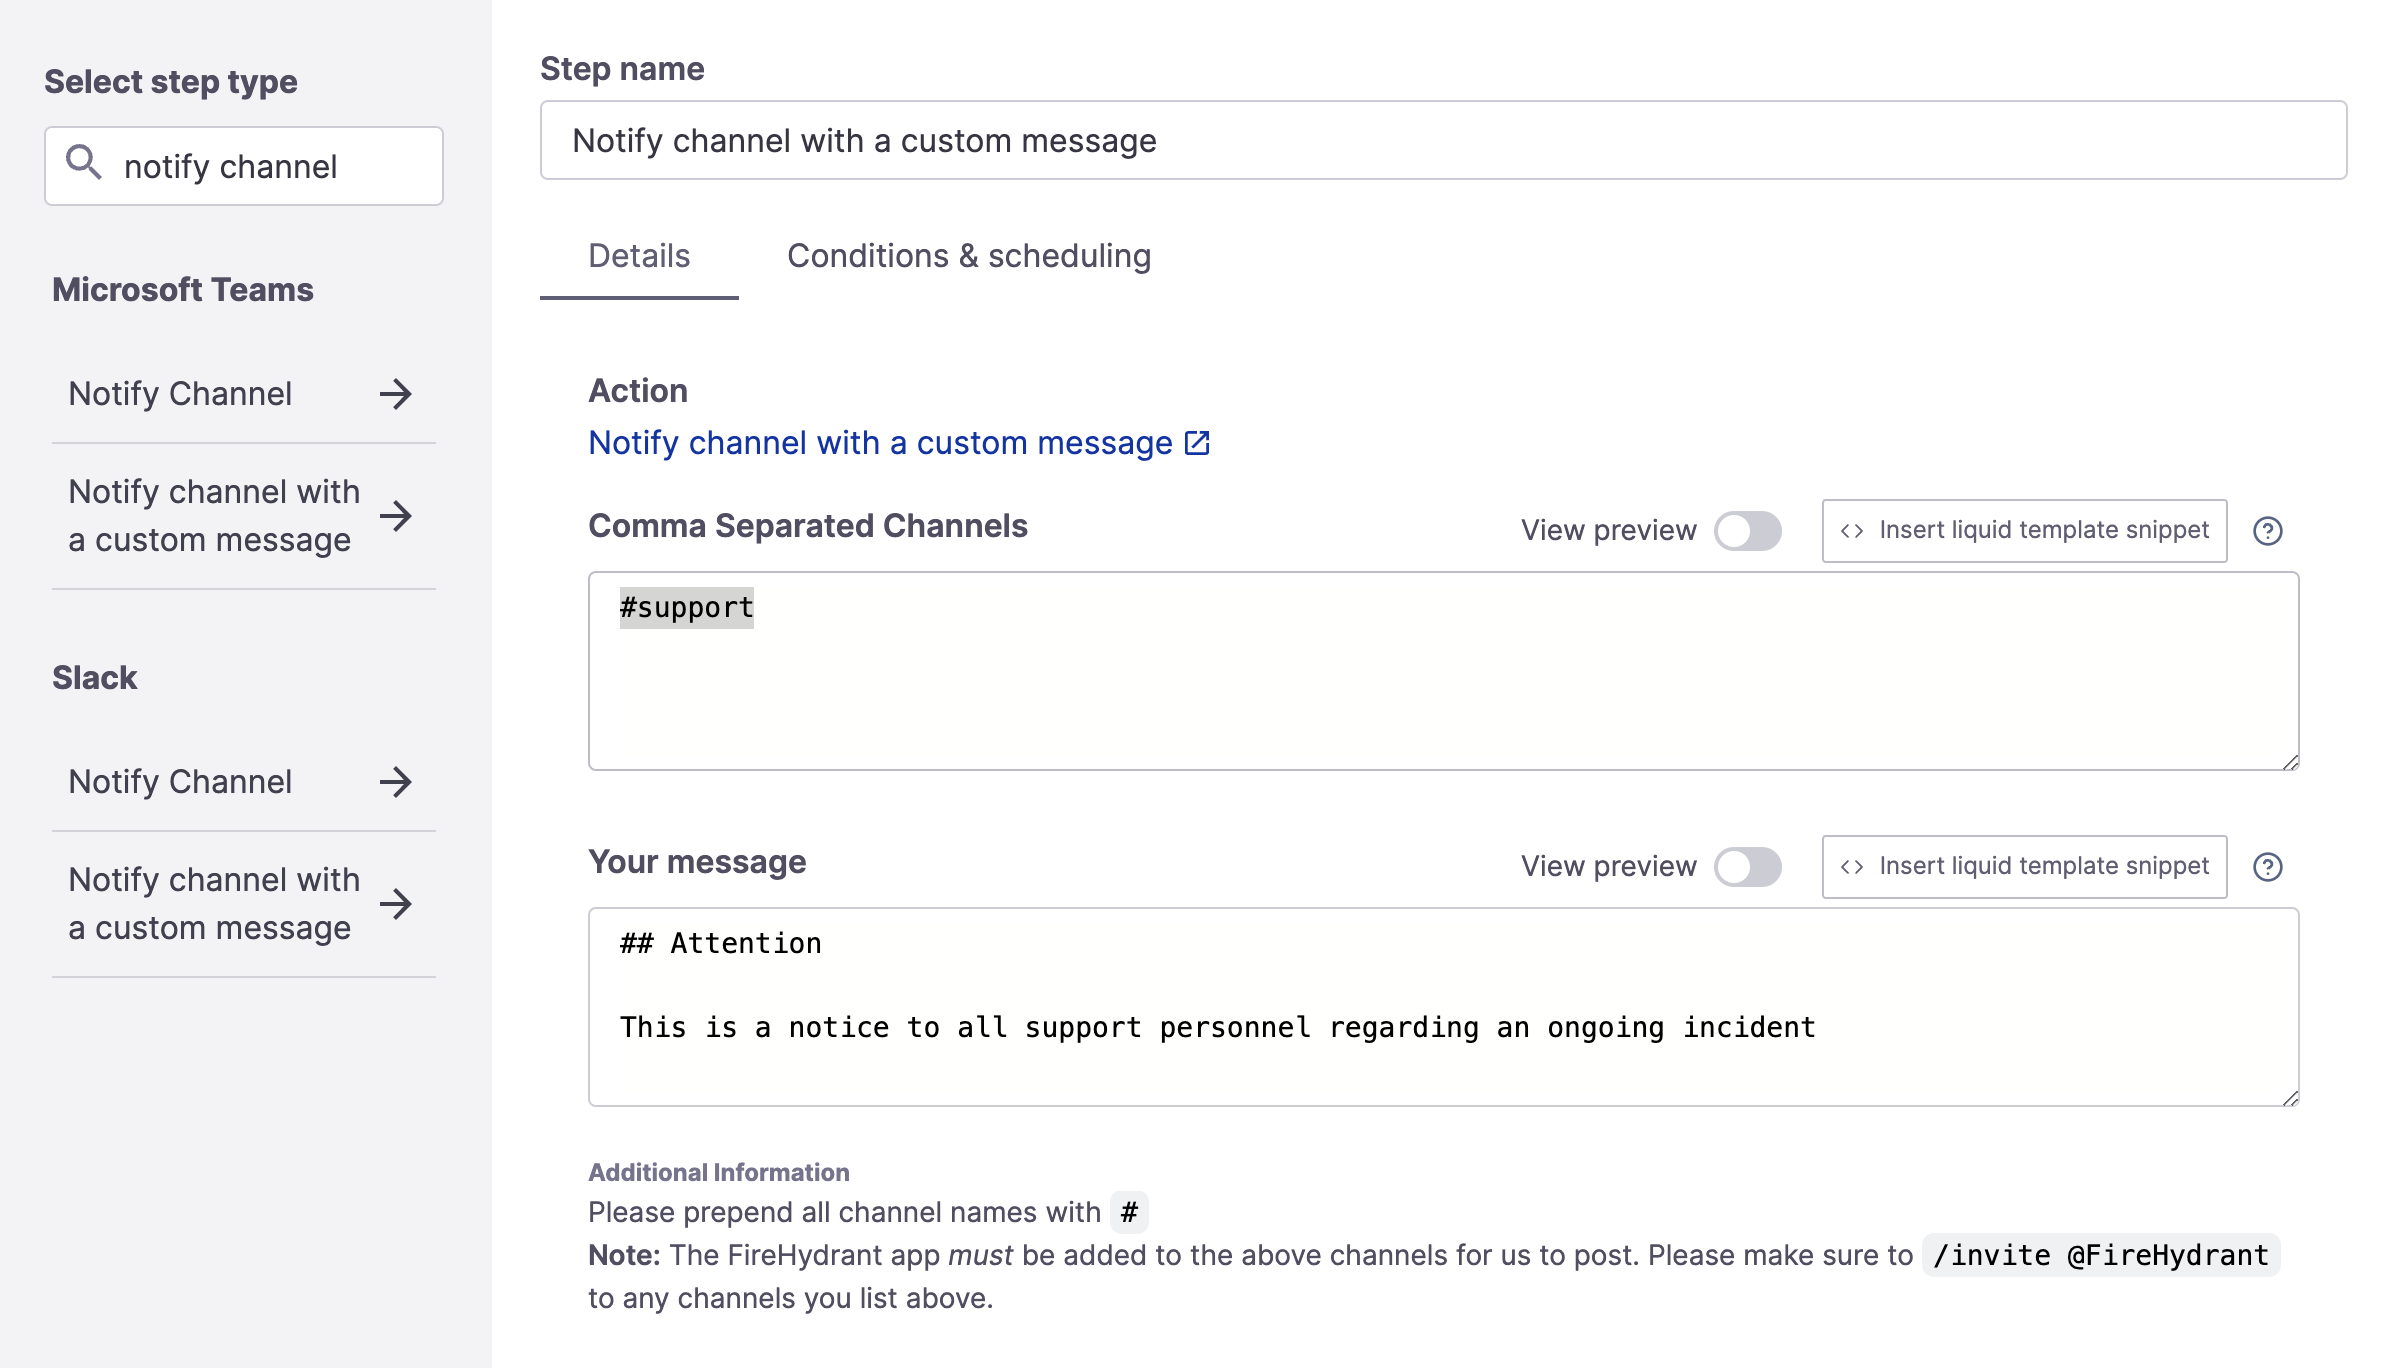 Notify channel with a custom message step